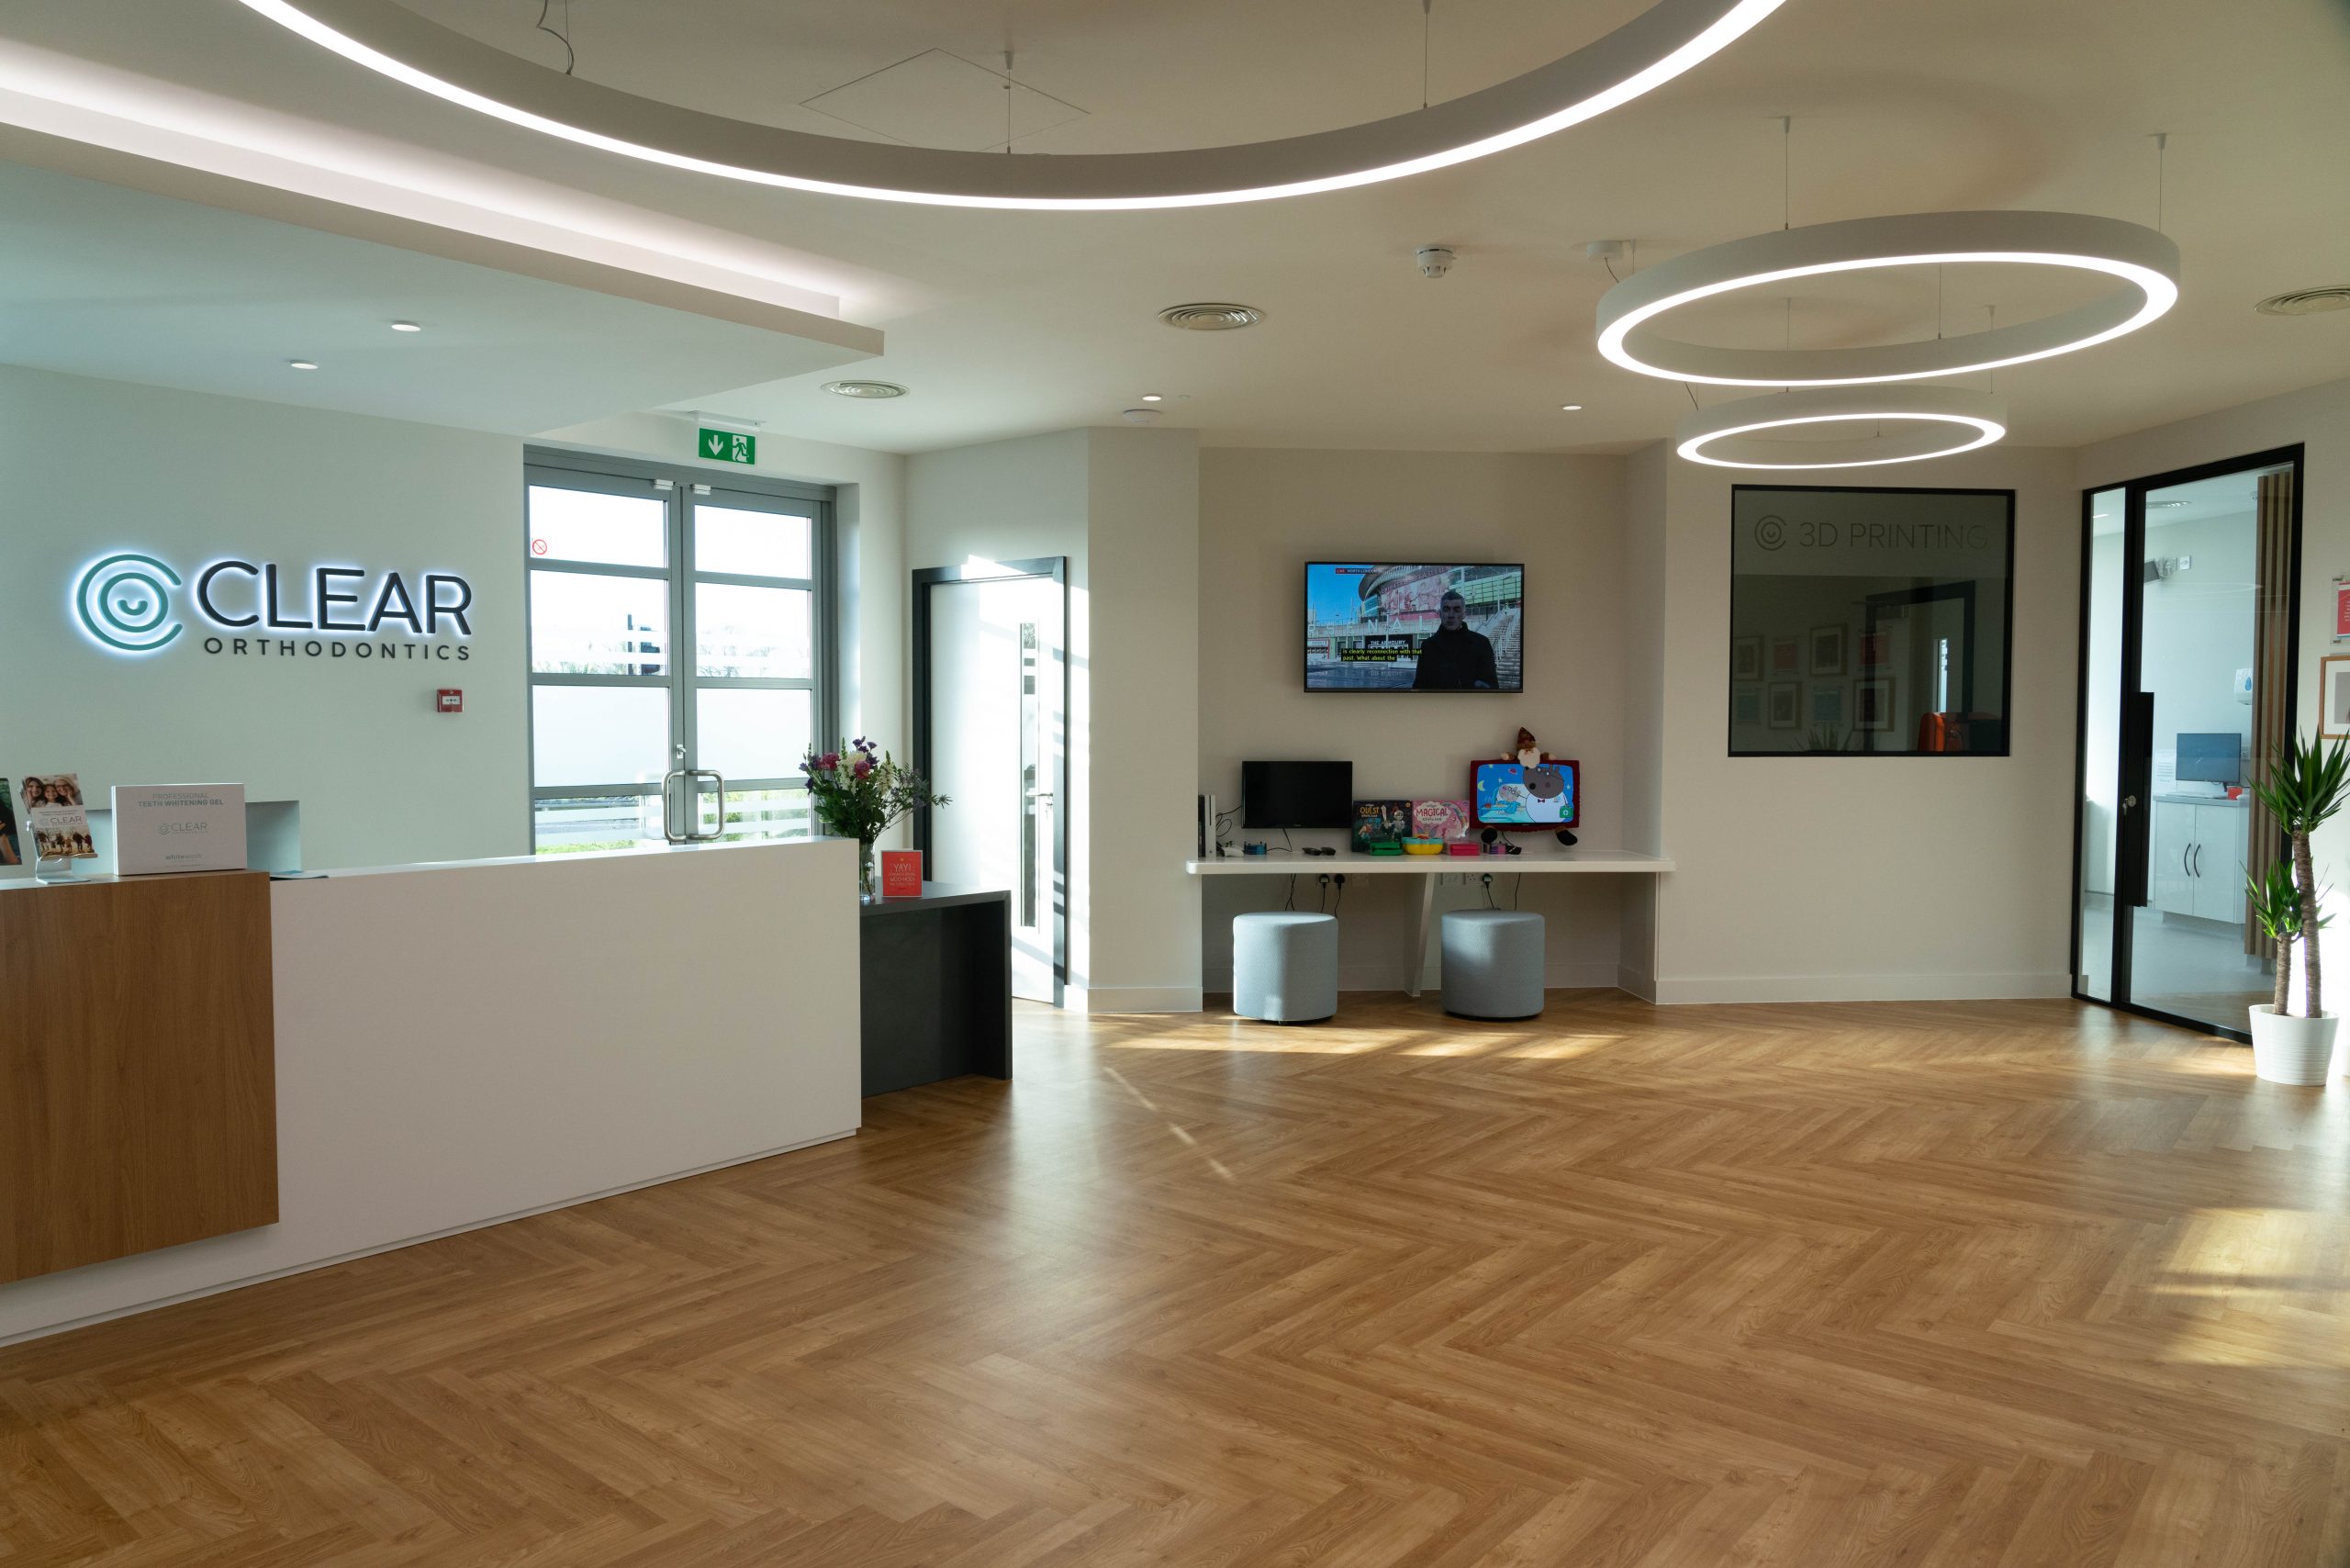 Clear Orthodontics – Completed Project